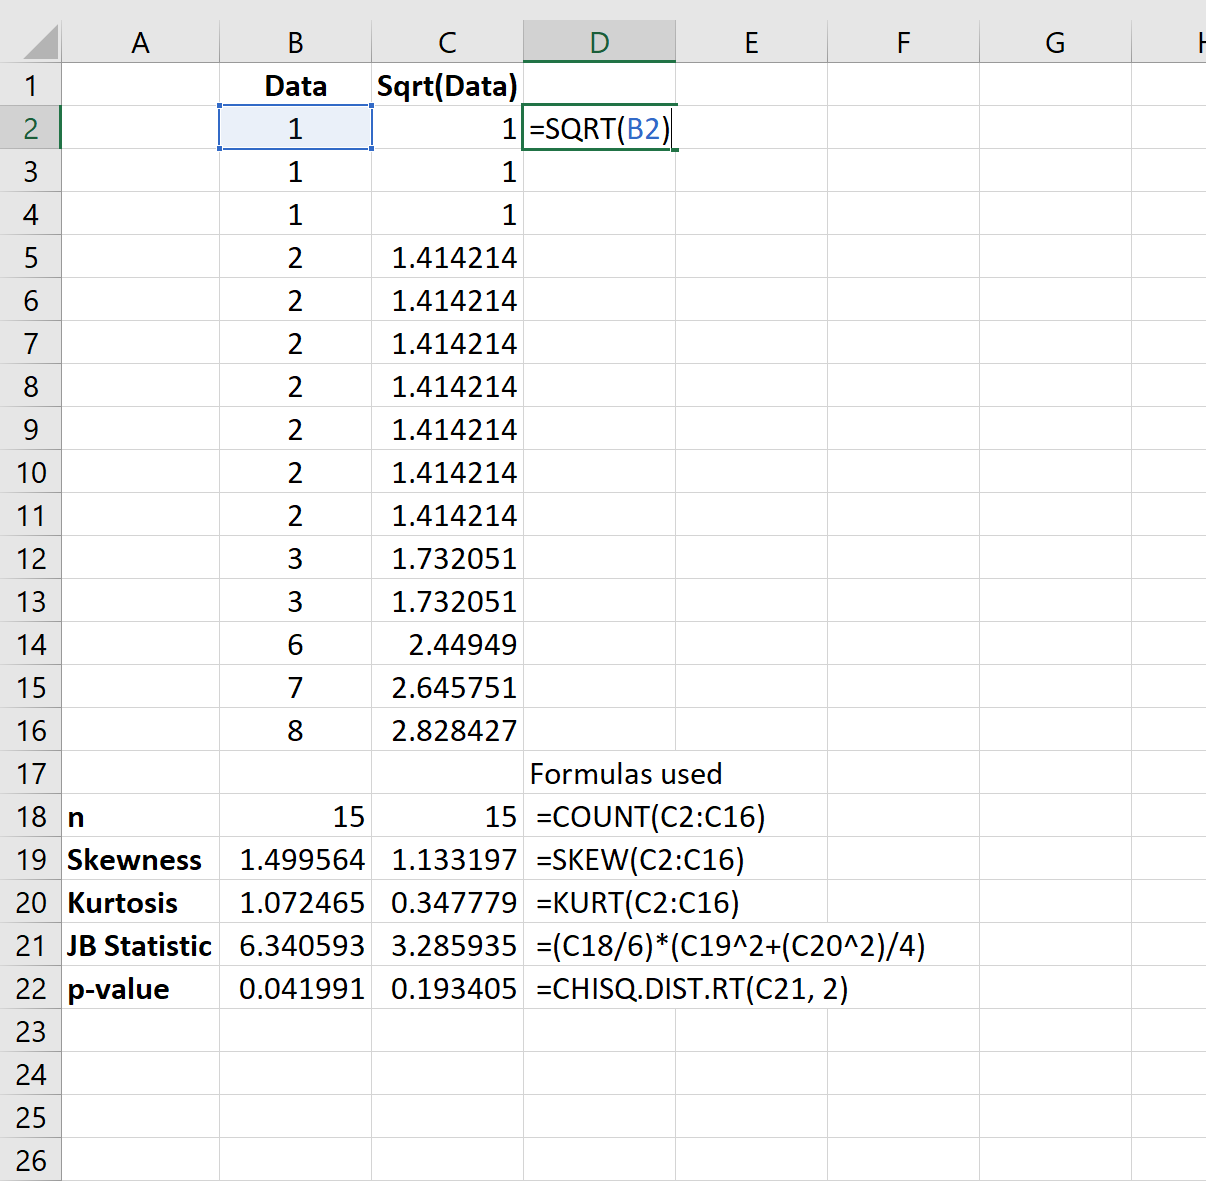 Square root transformation in Excel